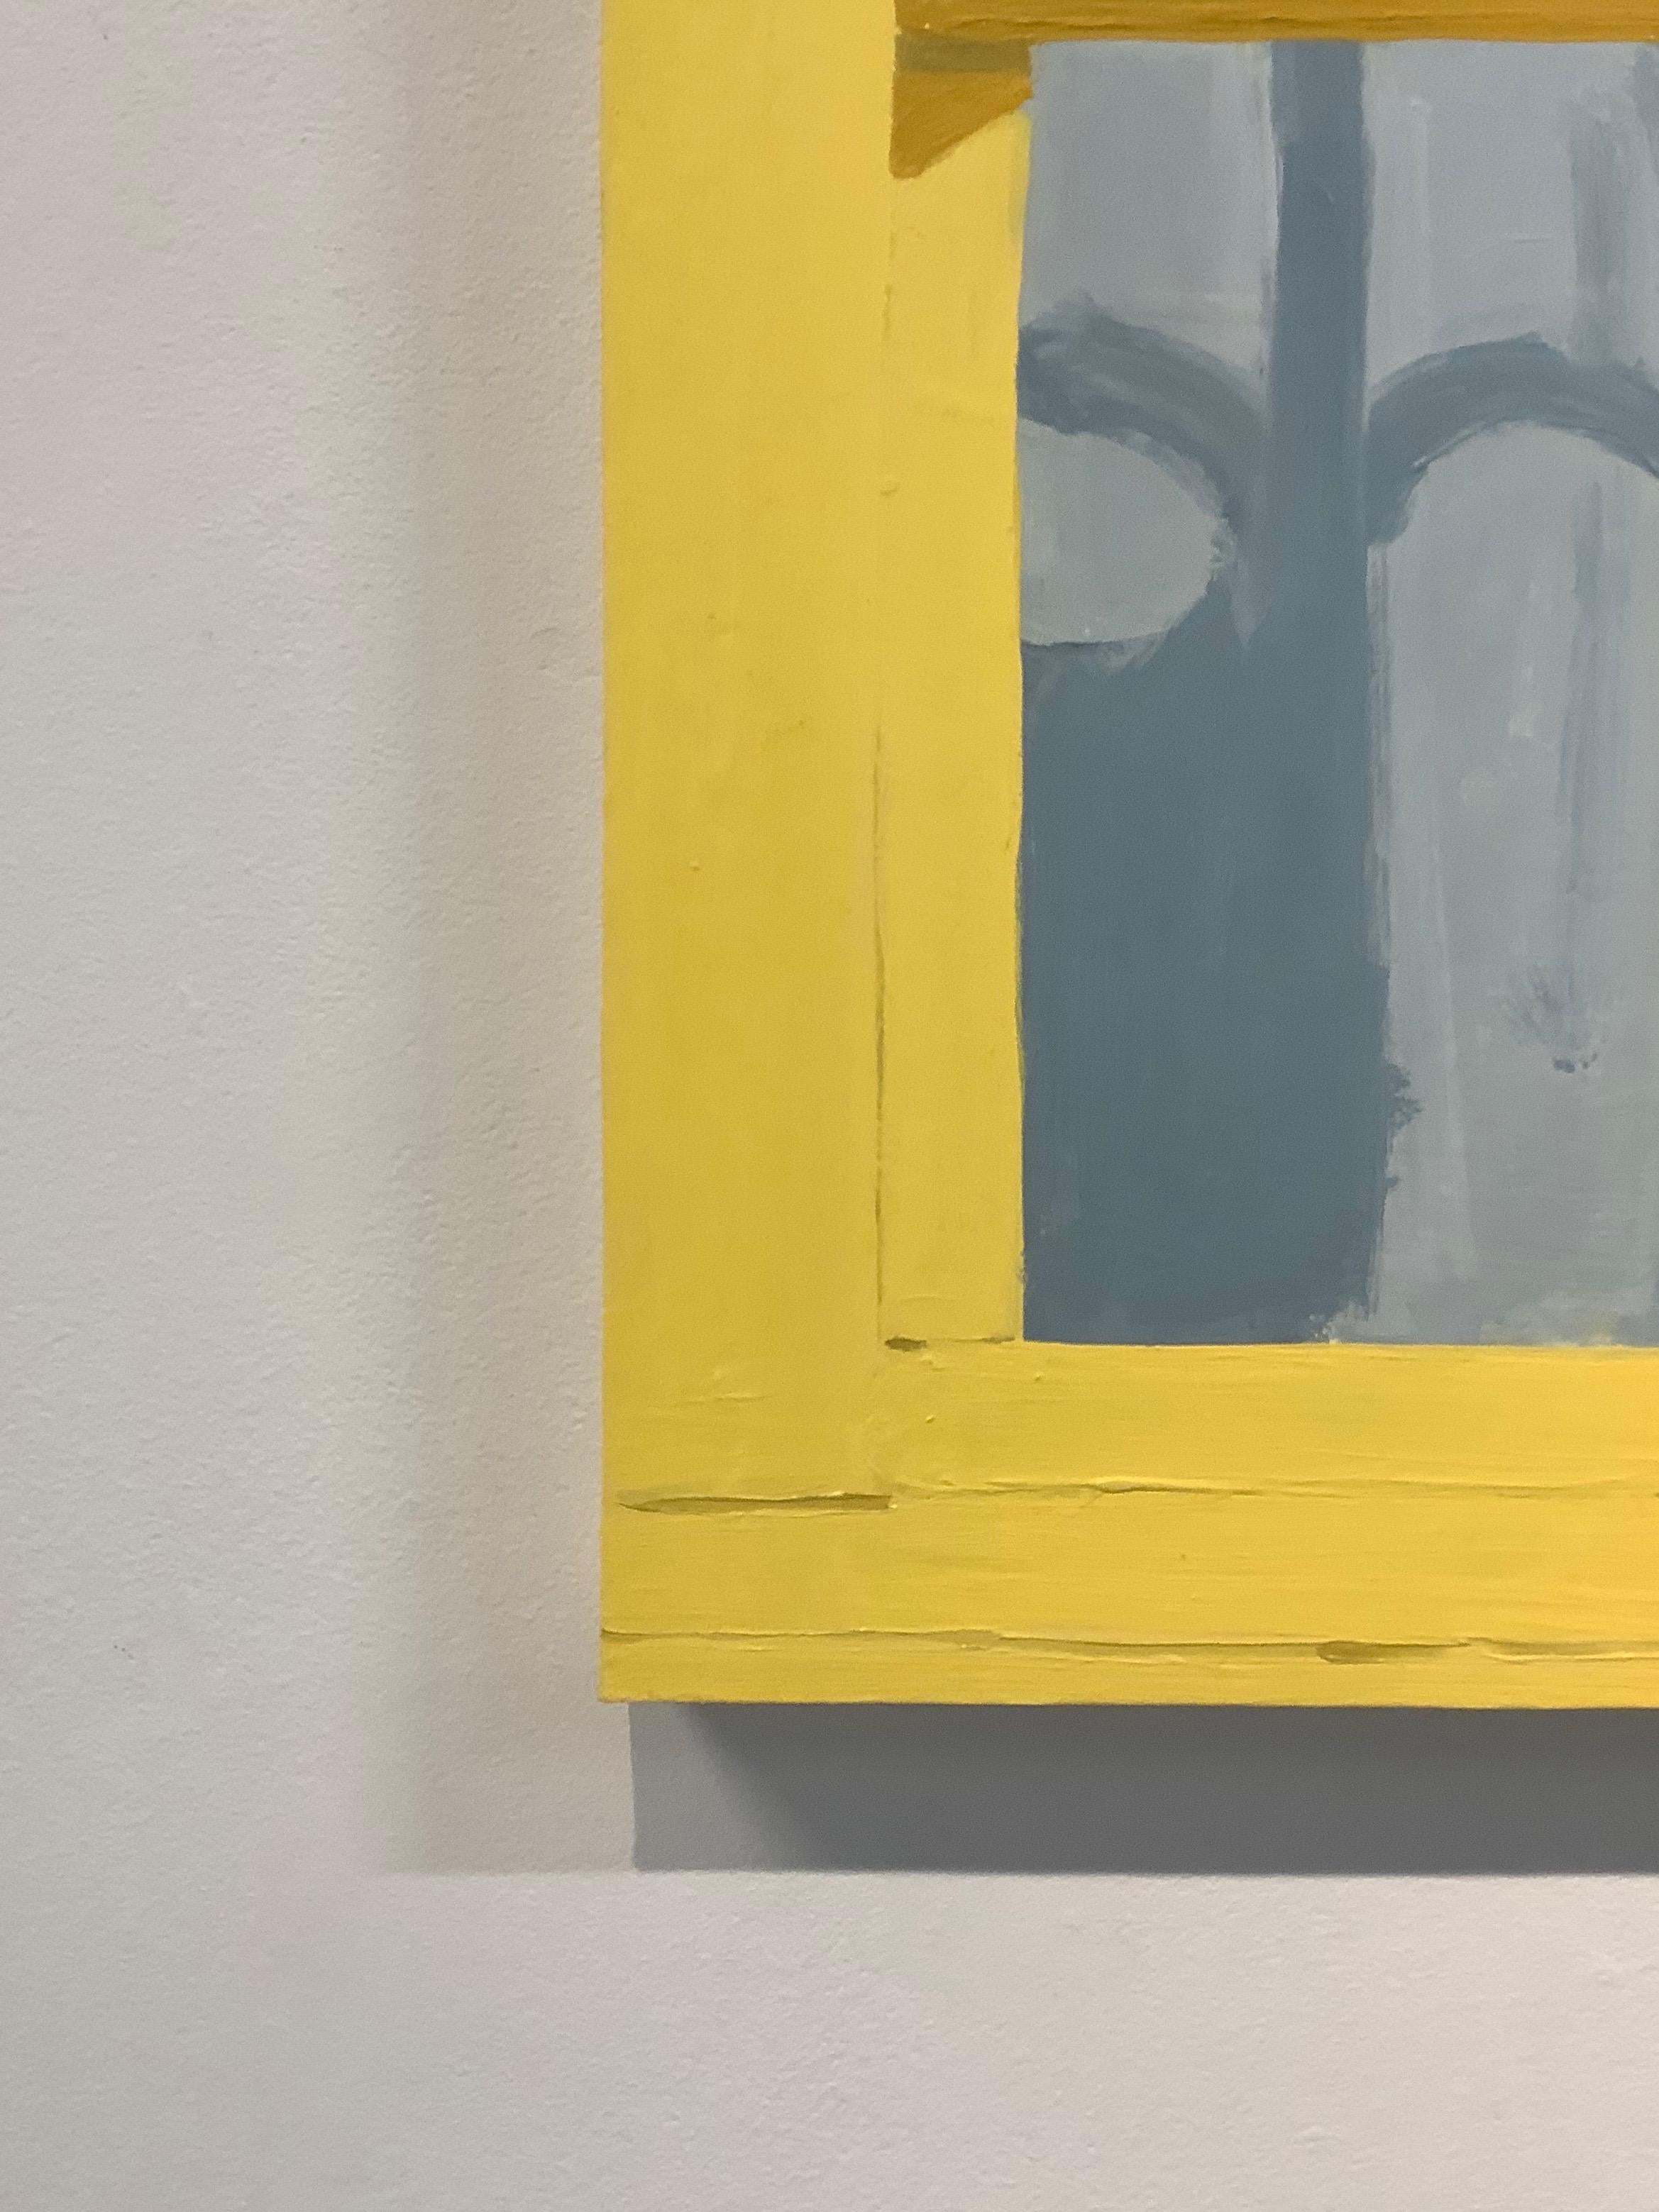 Yellow Window in Corsicana, Painting of Window, Blue Gray Curtain and Shadows 2